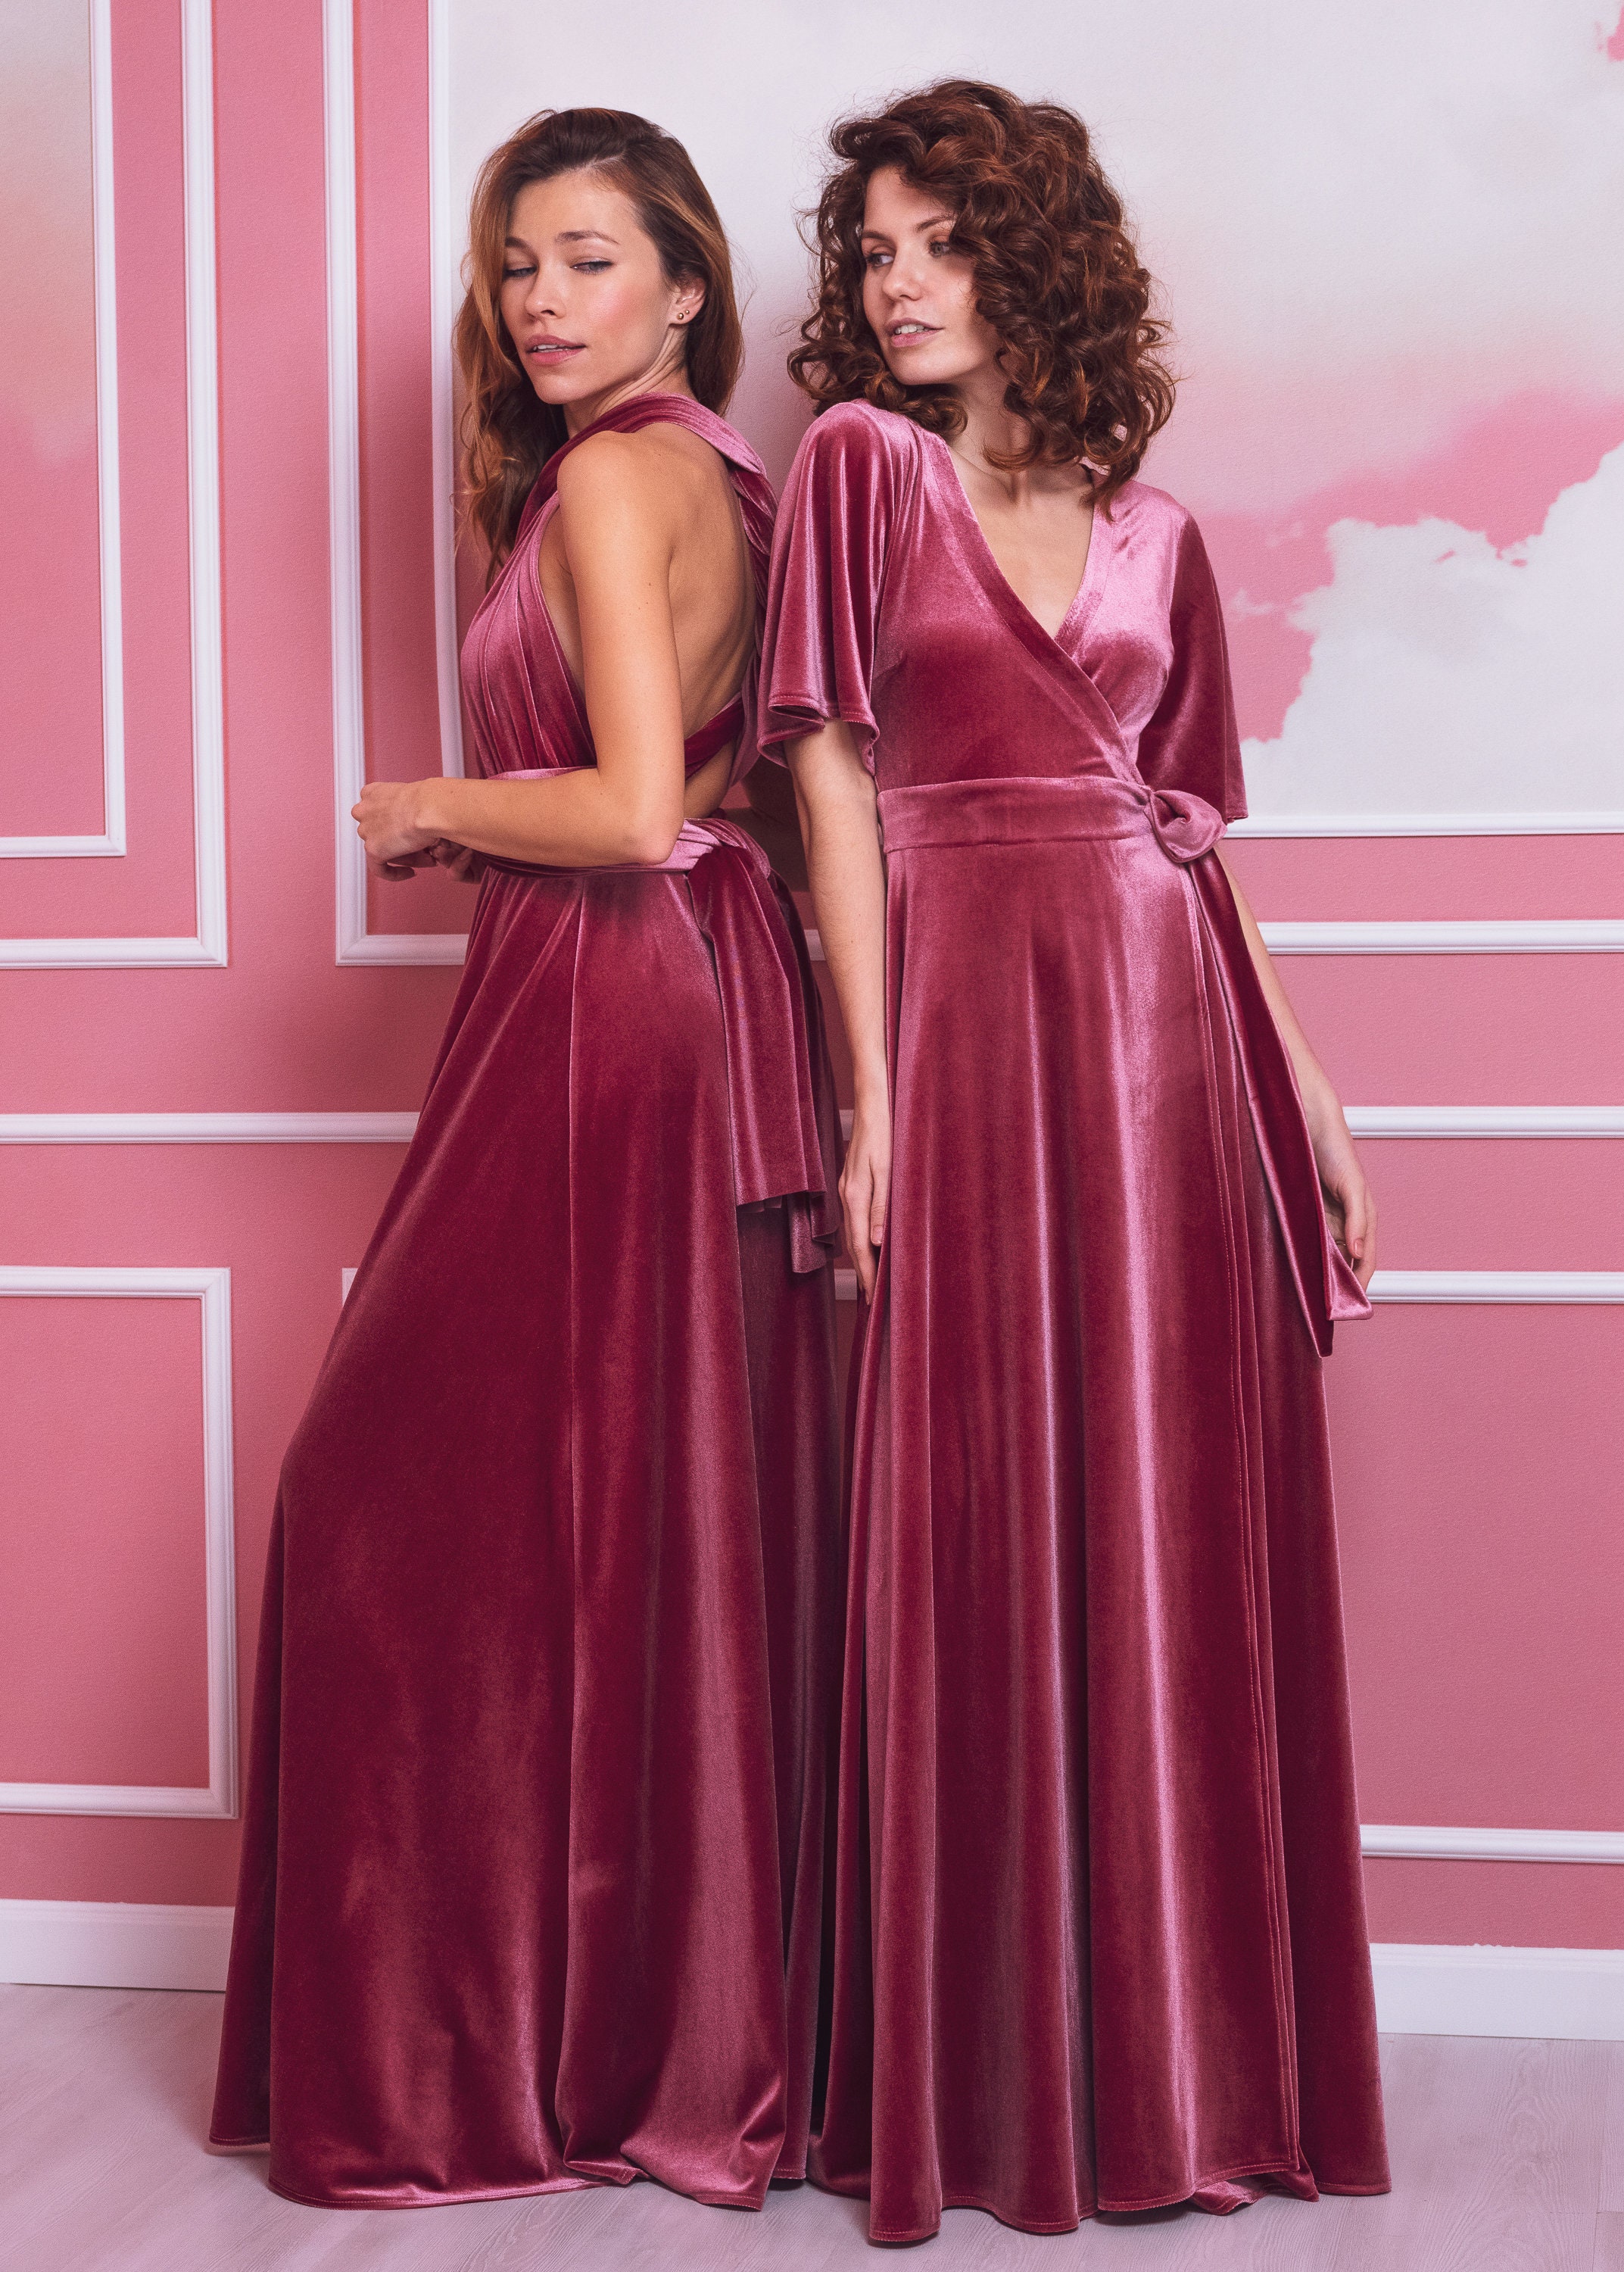 Velvet Ribbon Sash Dusty Rose - Wedding Dresses, Evening Wear and Party  Clothes by Alie Street.